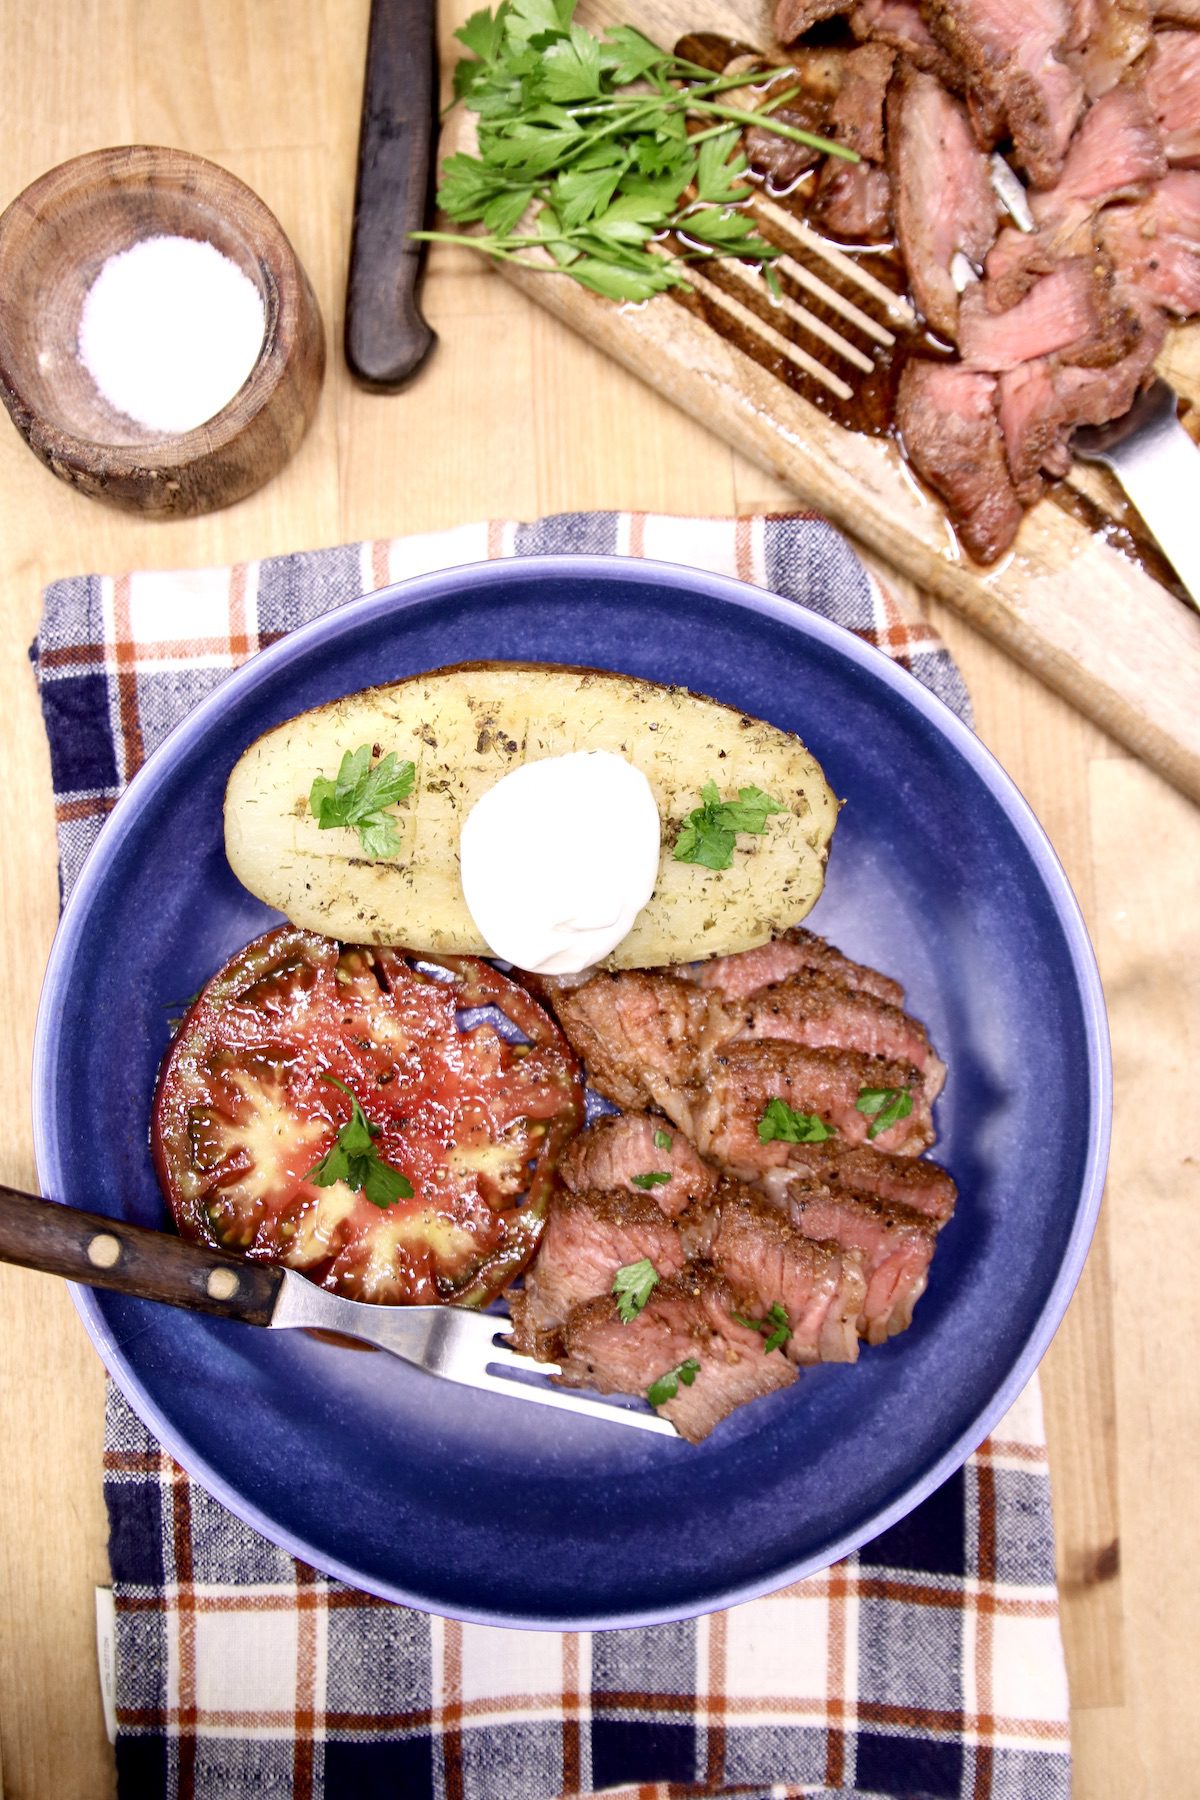 bowl of sliced roast beef, baked potato and sliced tomatoes